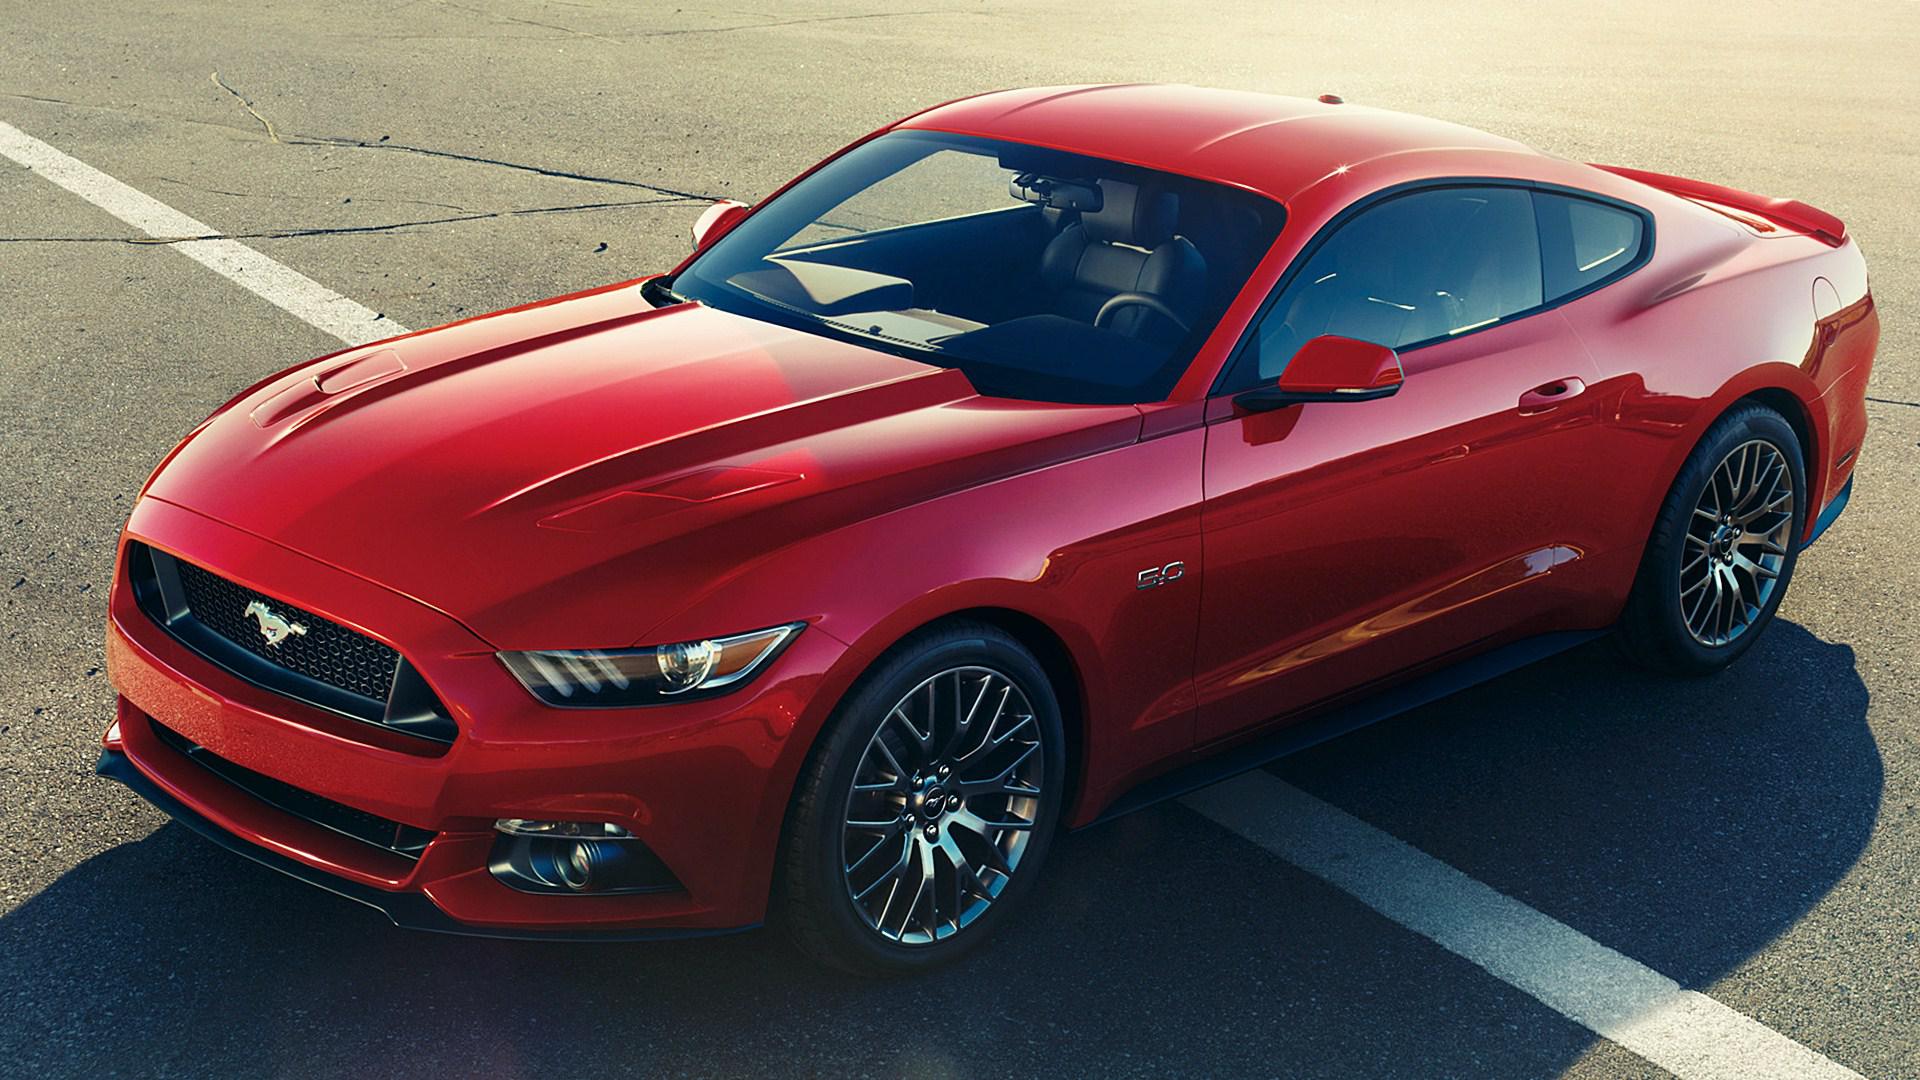 HD Ford Mustang Gt Red Wallpaper